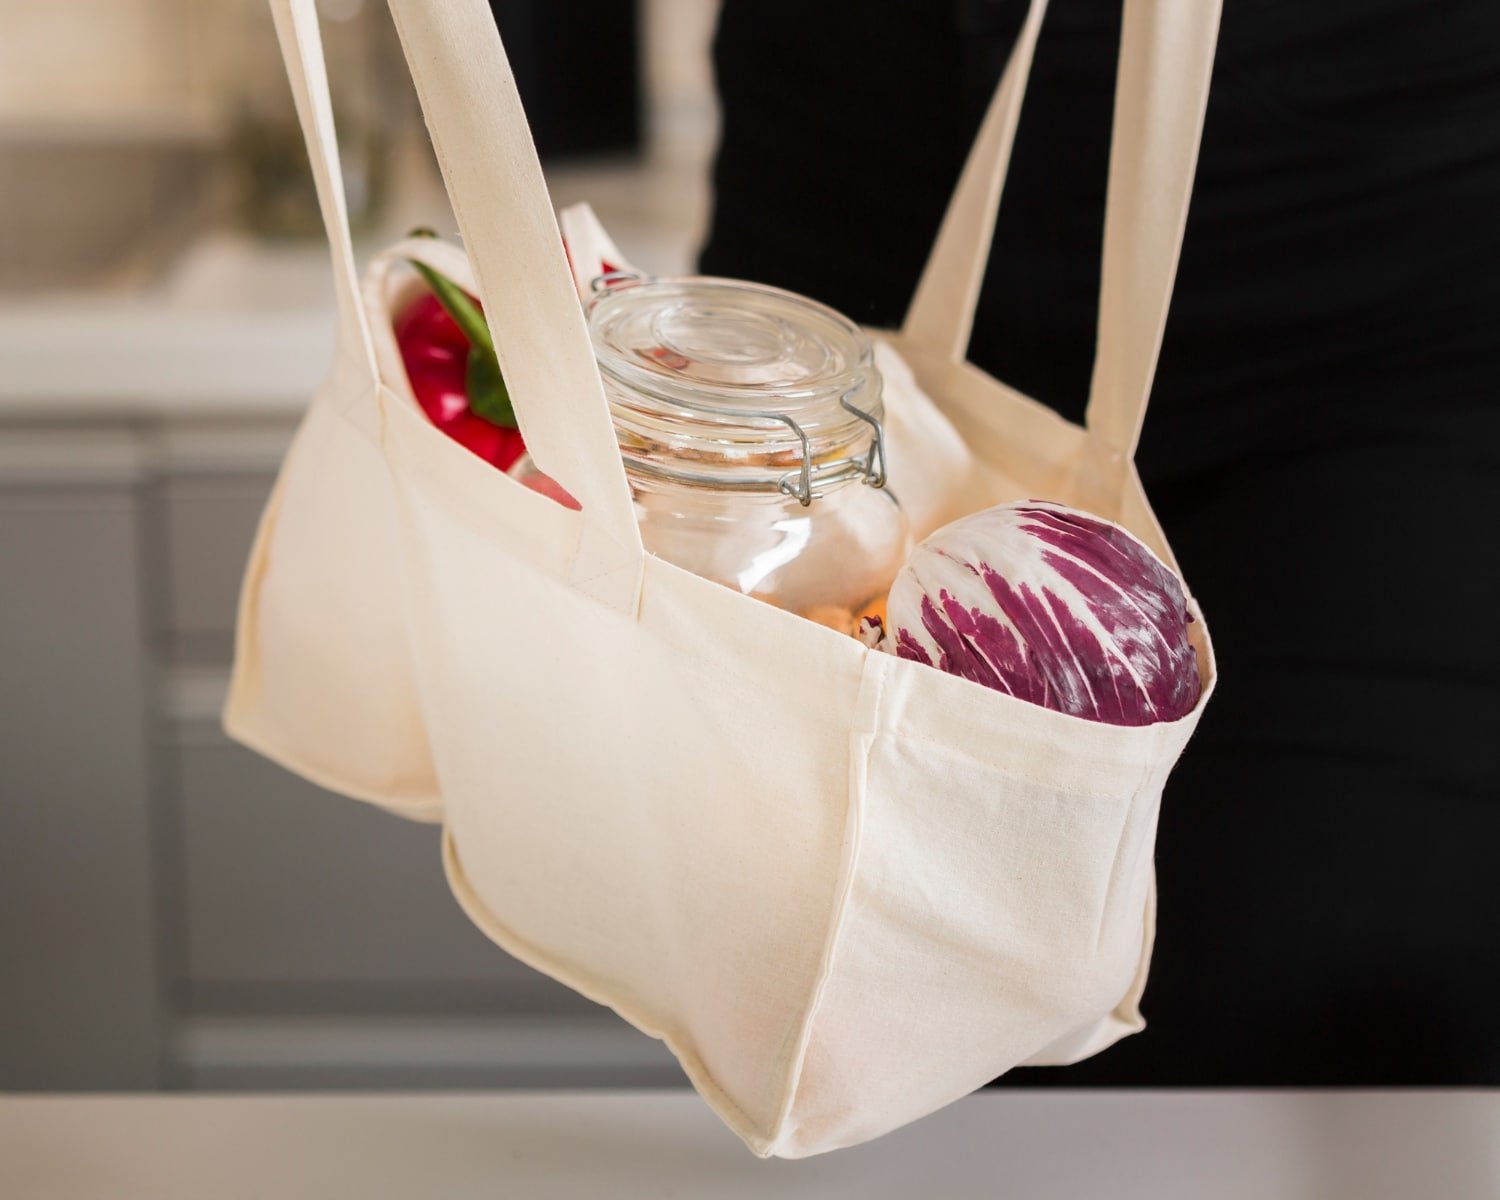 You are currently viewing Reduce Plastic Waste With Stasher’s Reusable Silicone Storage Bags